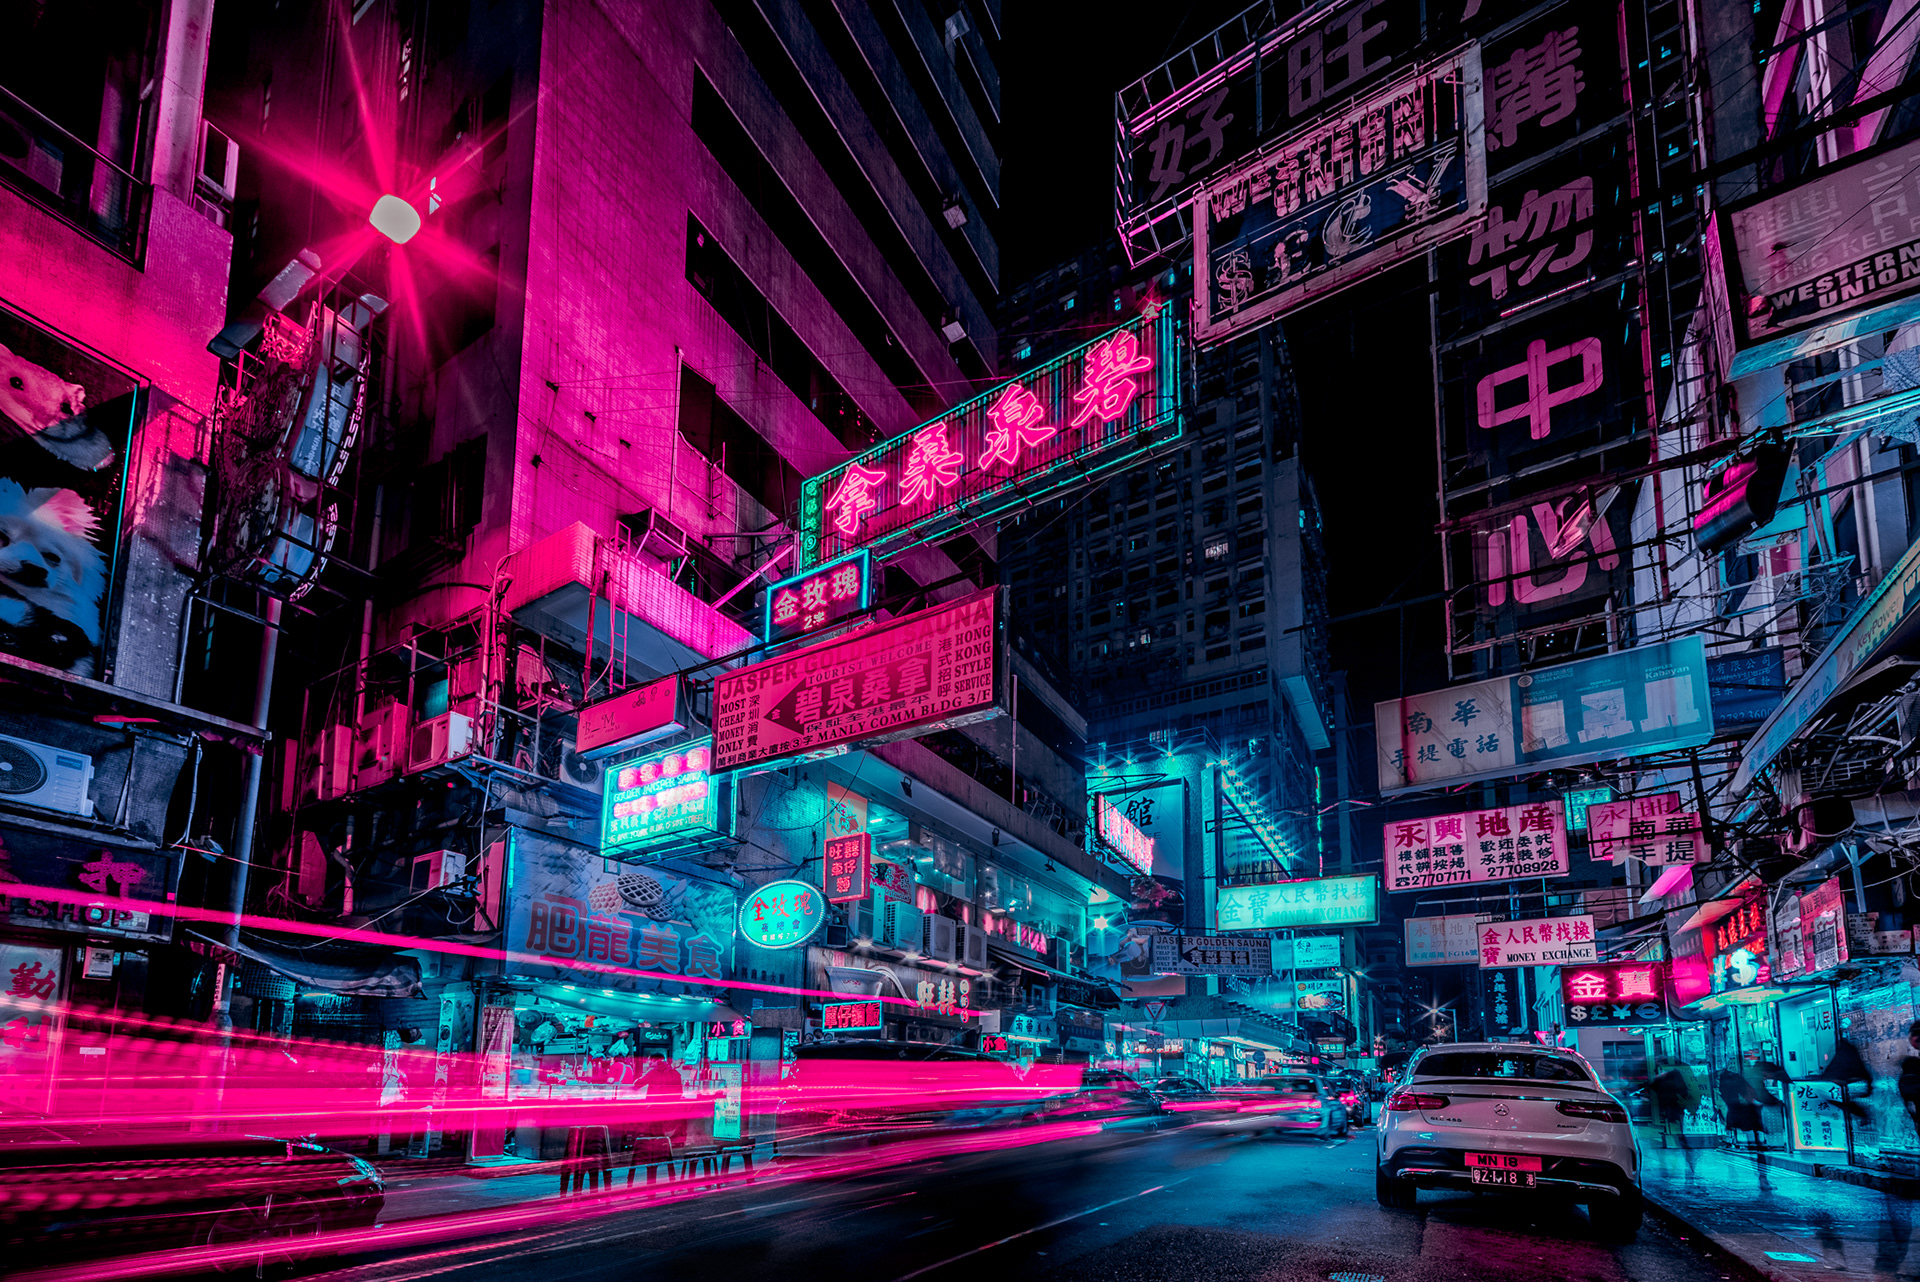 #HONGKONGGLOW: A photography project by Xavier Portela